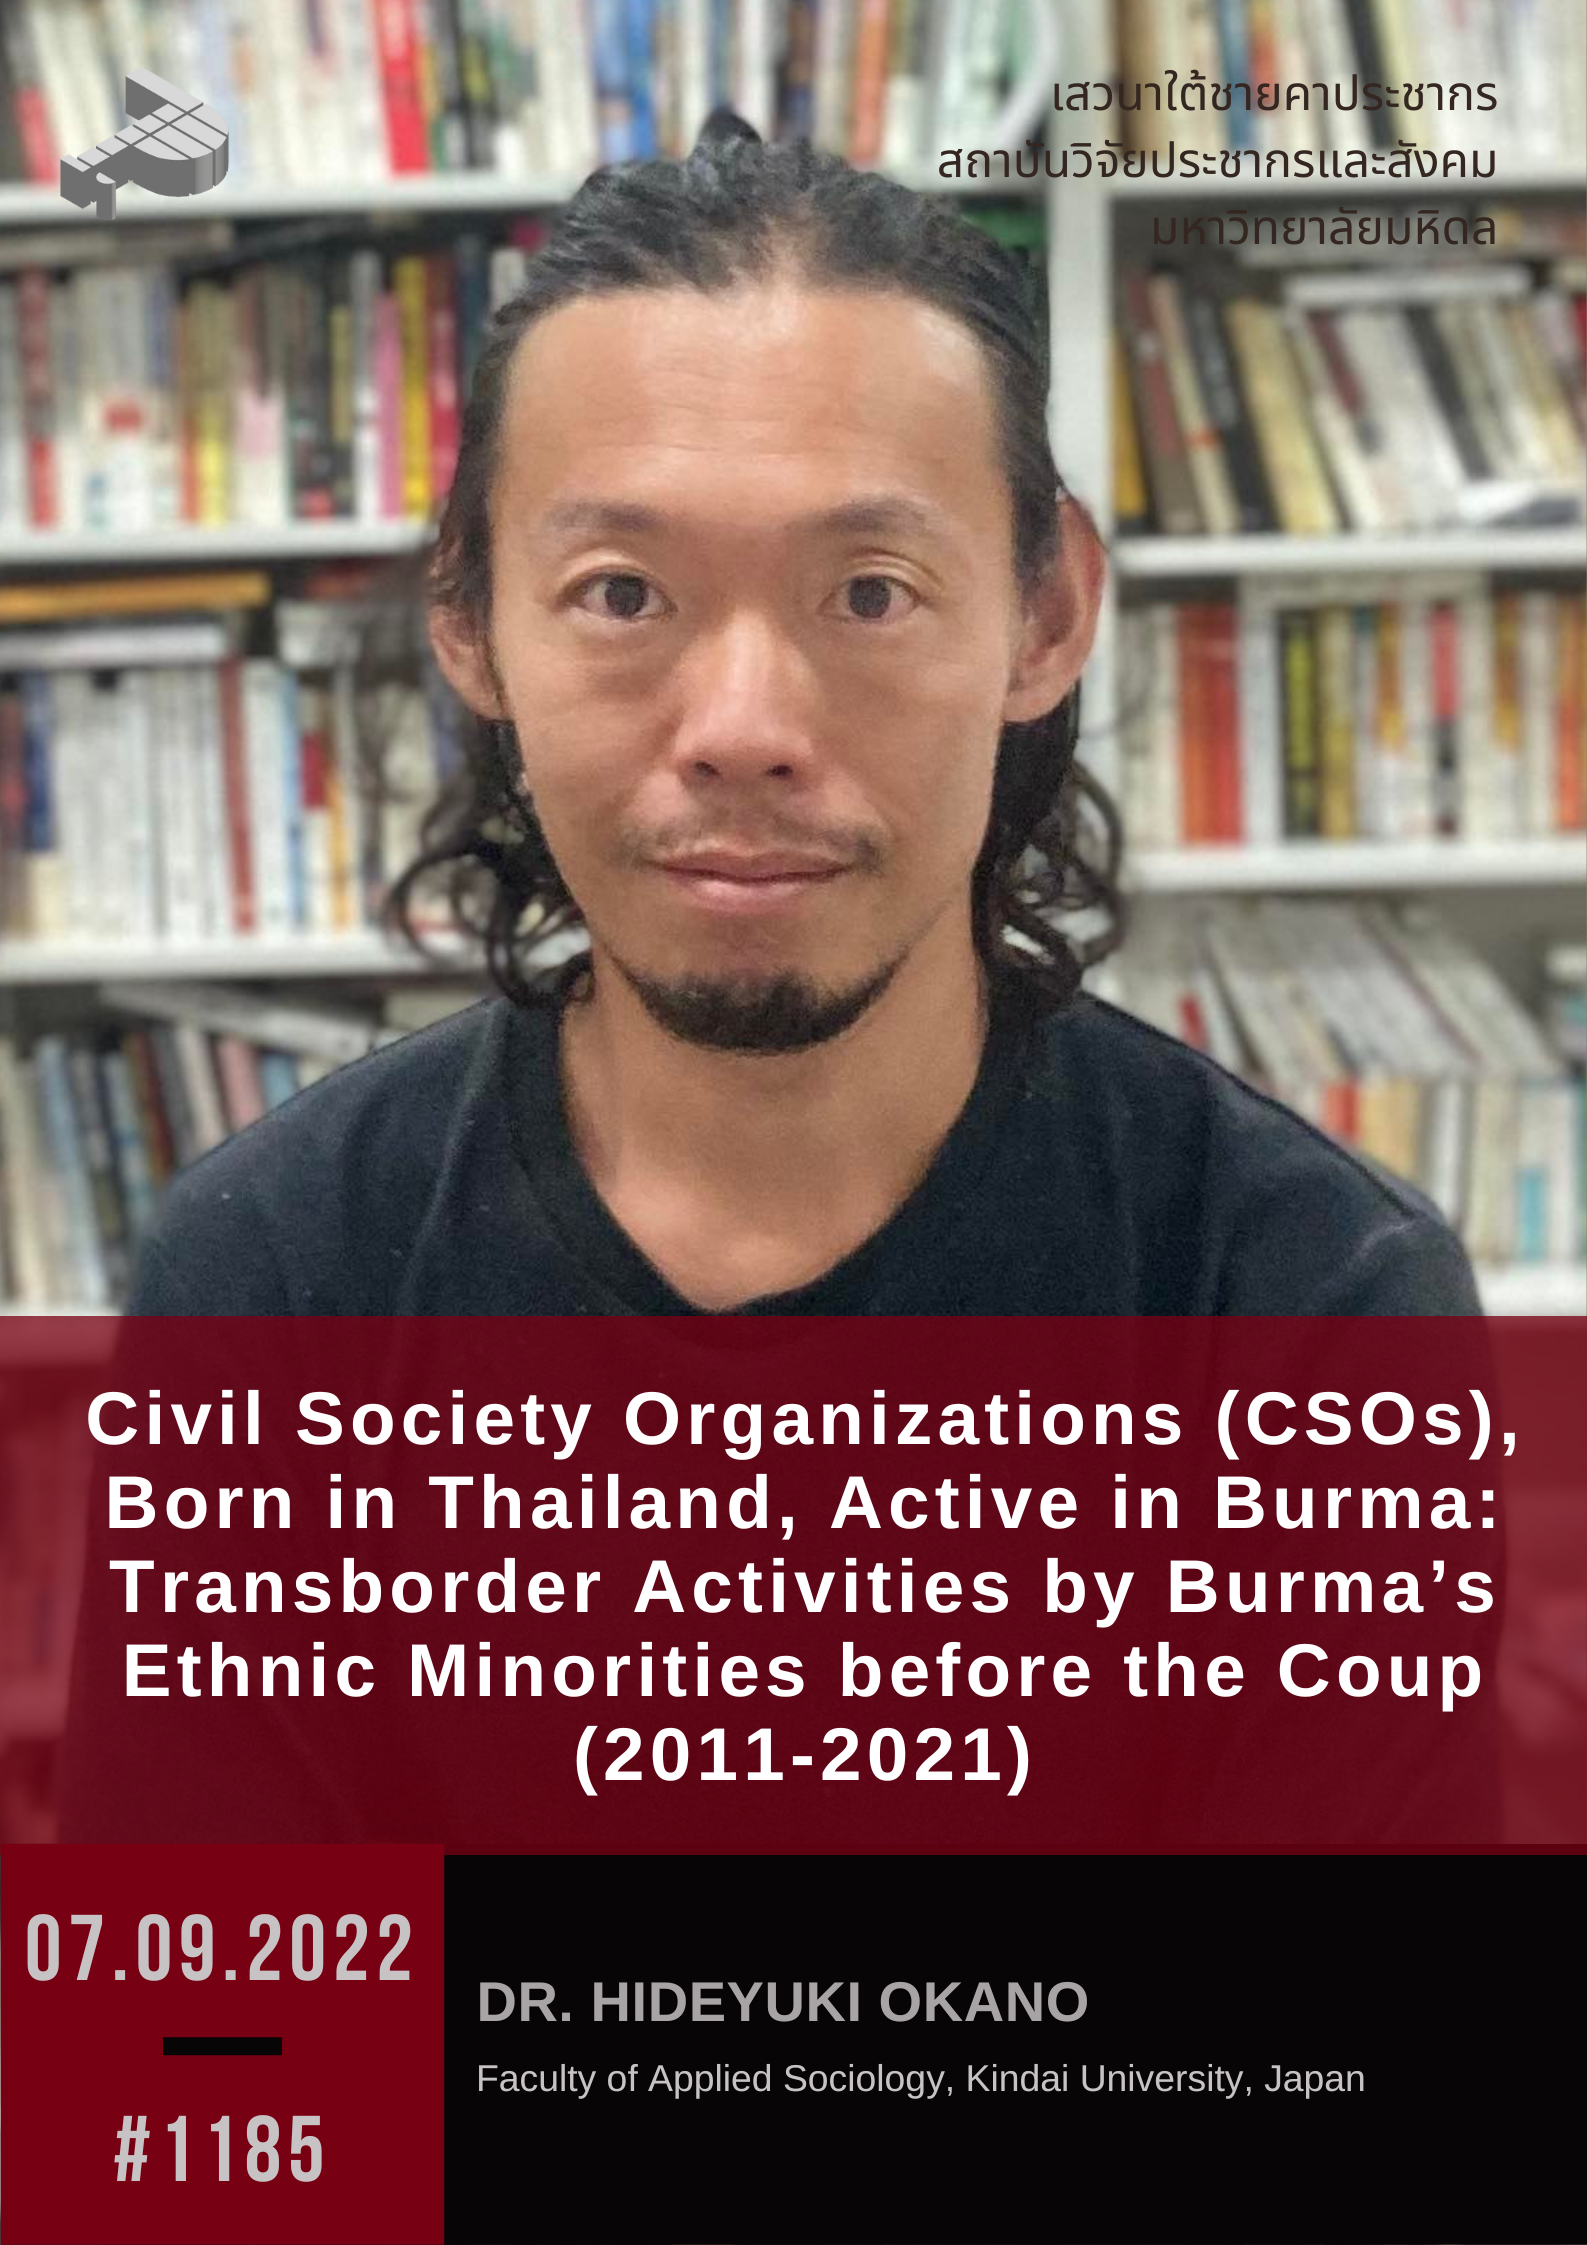 Civil Society Organizations (CSOs), Born in Thailand, Active in Burma: Transborder Activities by Burma’s Ethnic Minorities before the Coup (2011-2021)